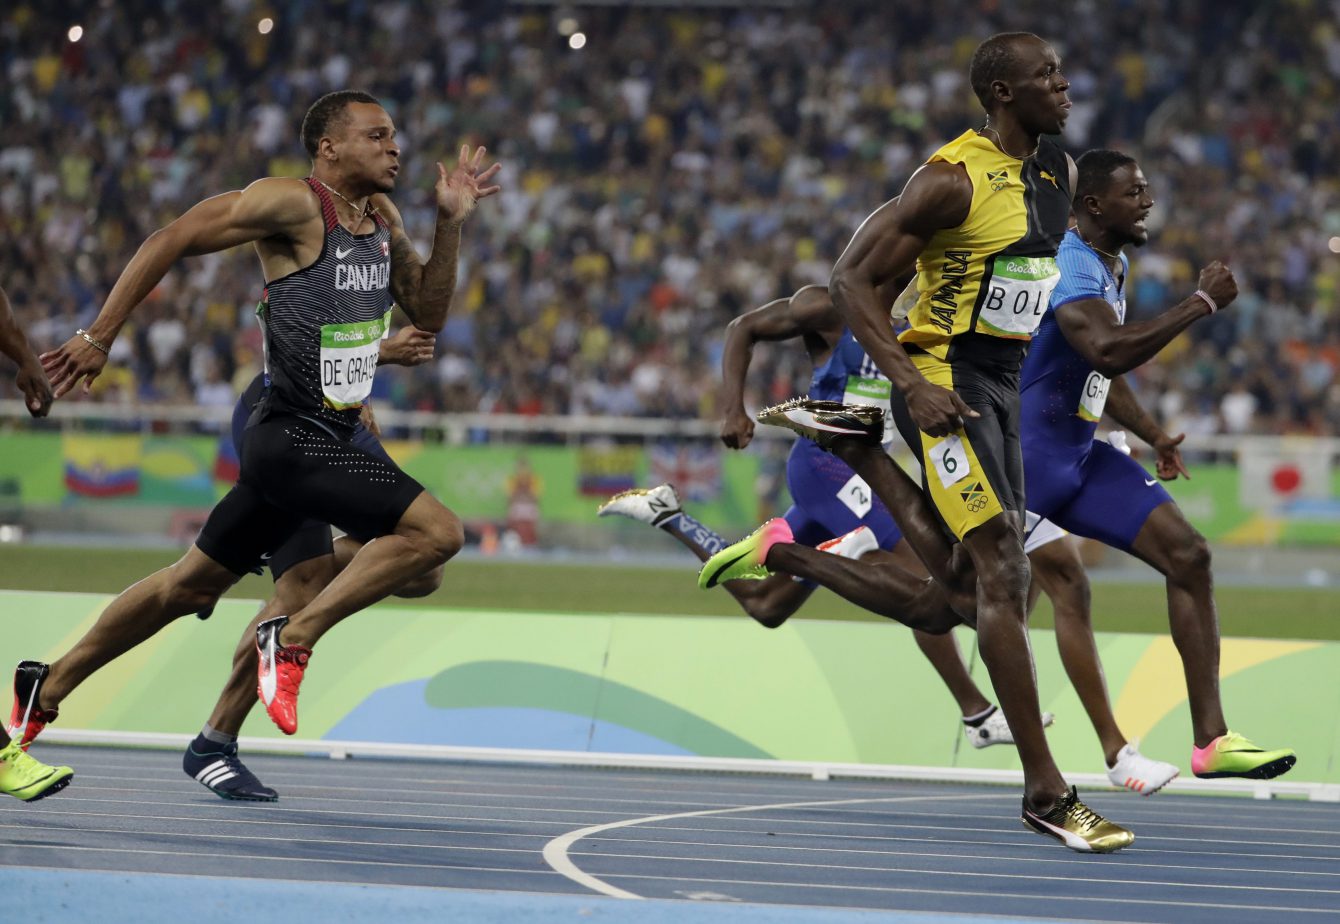 Jamaica's Usain Bolt sprints ahead of Canada's Andre de Grasse, left, and United States' Justin Gatlin in the men's 100-meter final during the athletics competitions of the 2016 Summer Olympics at the Olympic stadium in Rio de Janeiro, Brazil, Sunday, Aug. 14, 2016. (AP Photo/David Goldman)